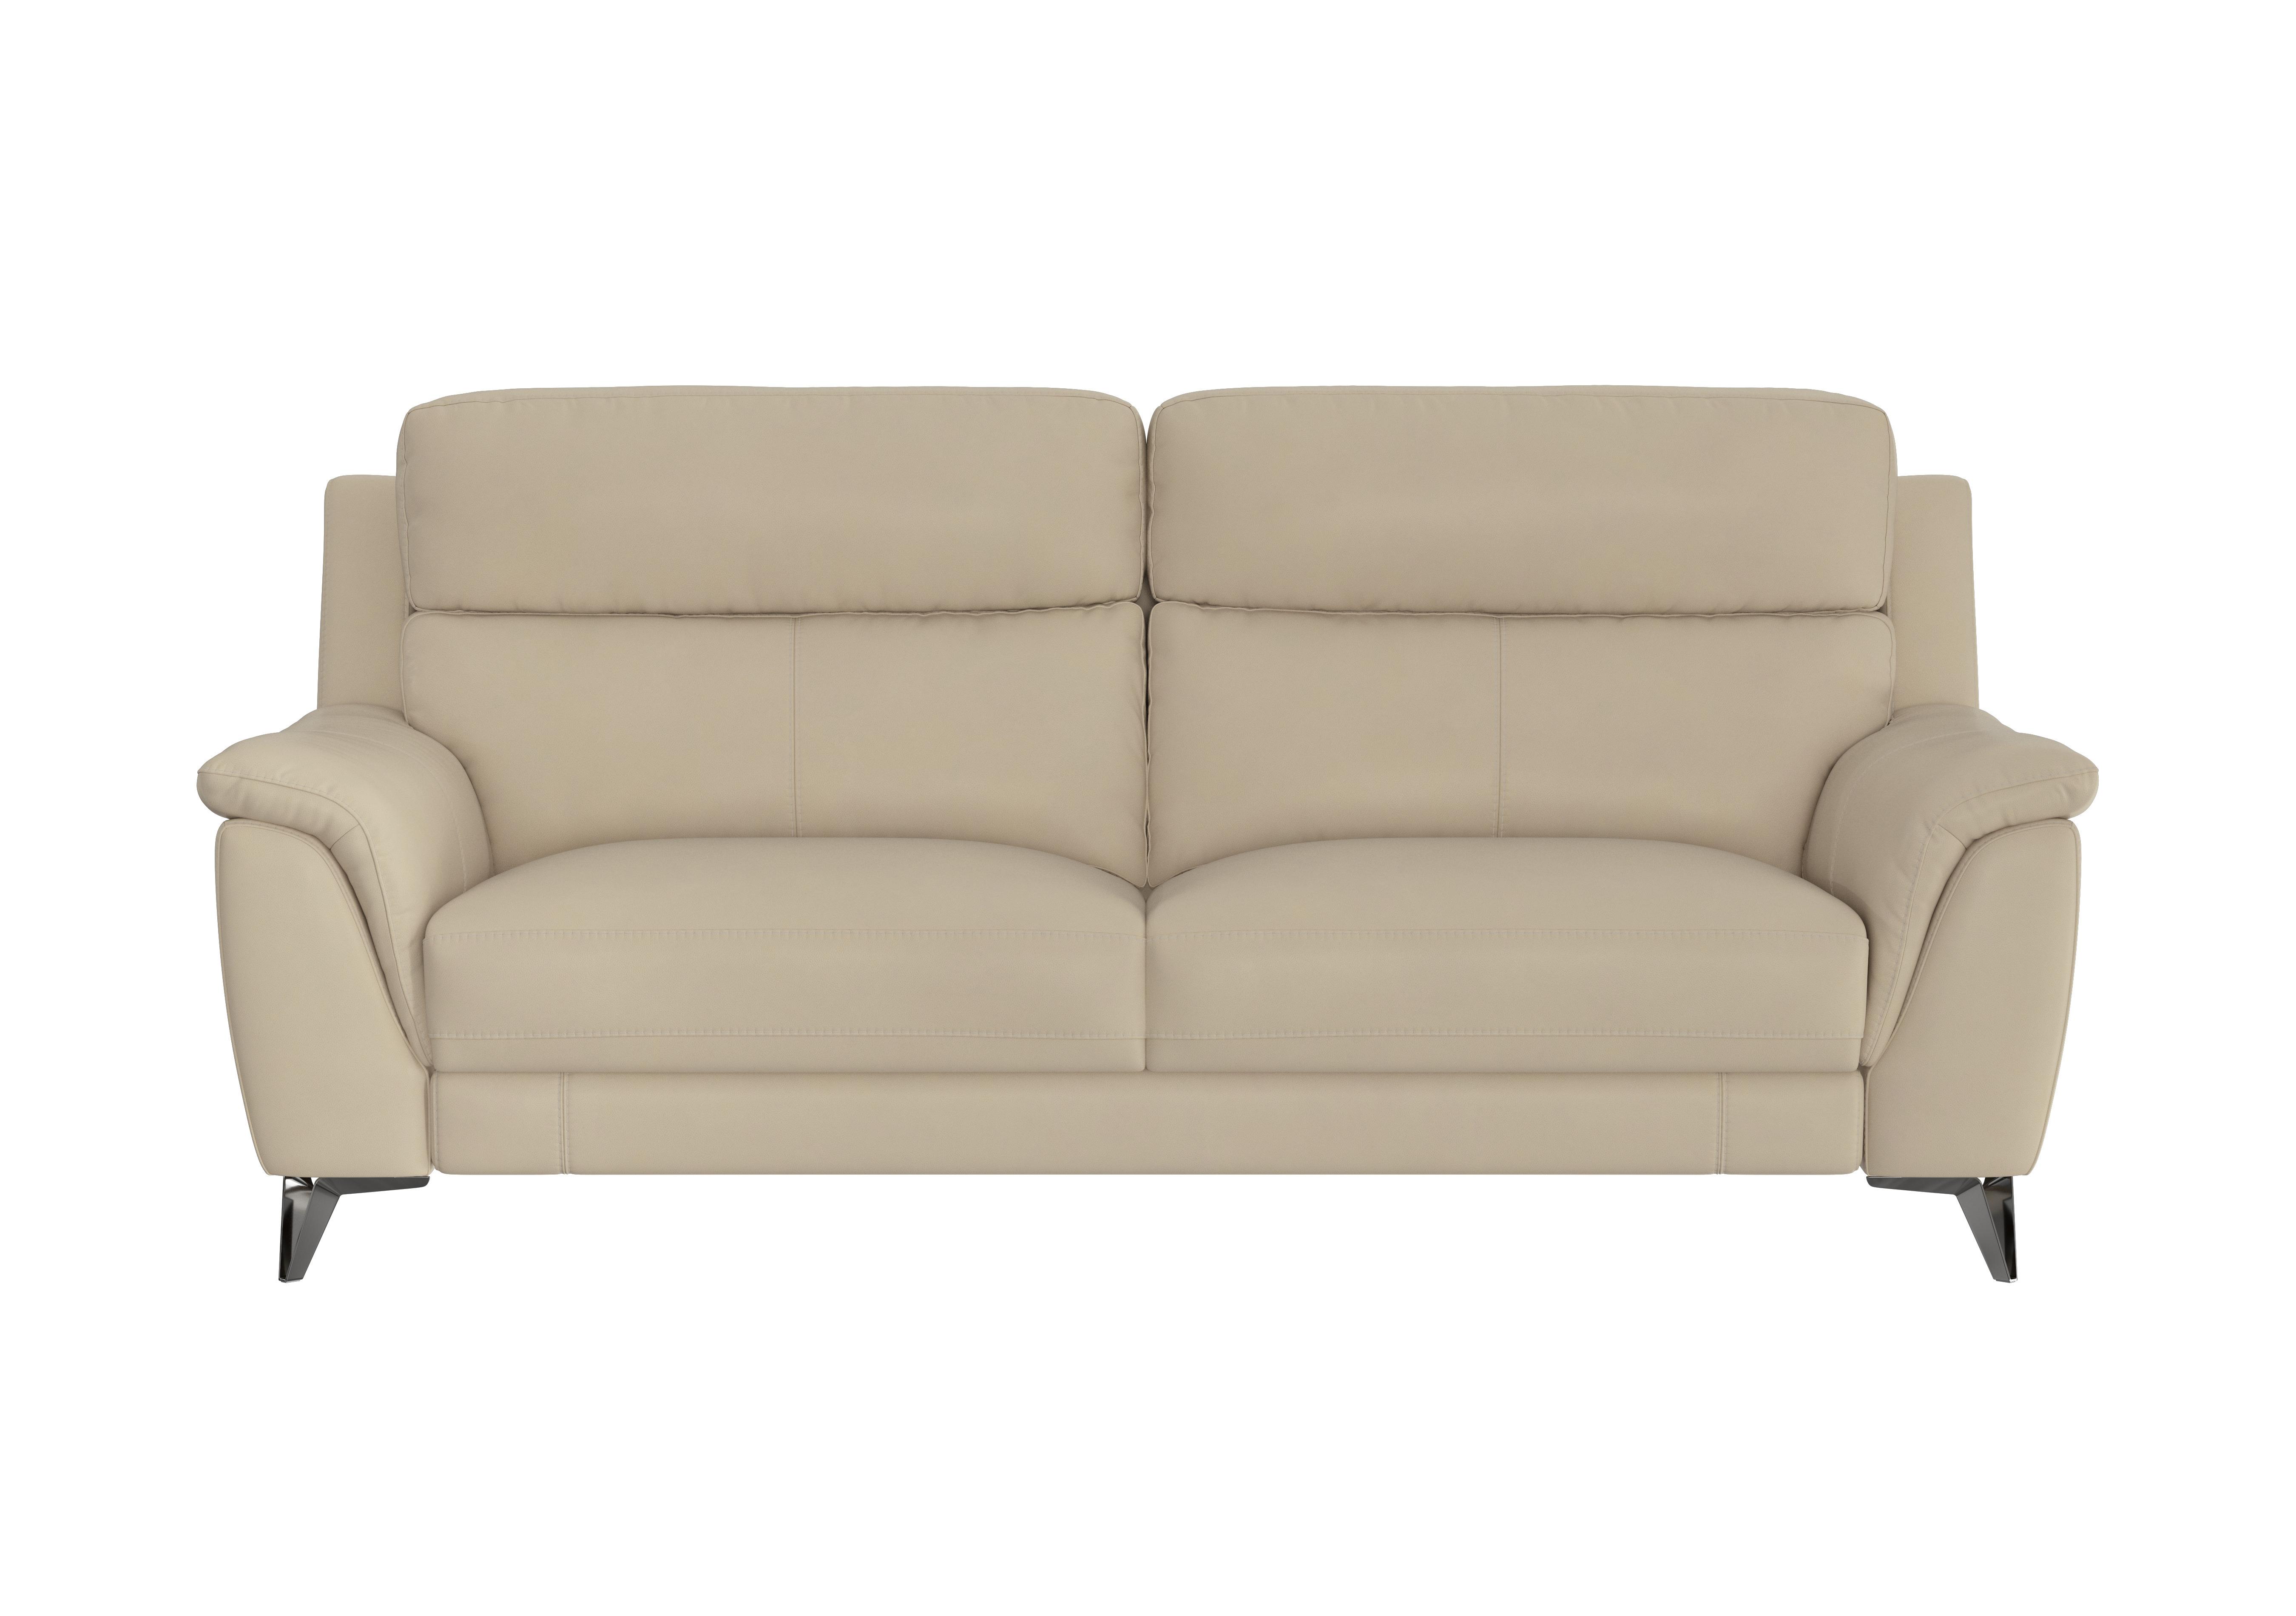 Contempo 3 Seater Leather Sofa in Bv-862c Bisque on Furniture Village